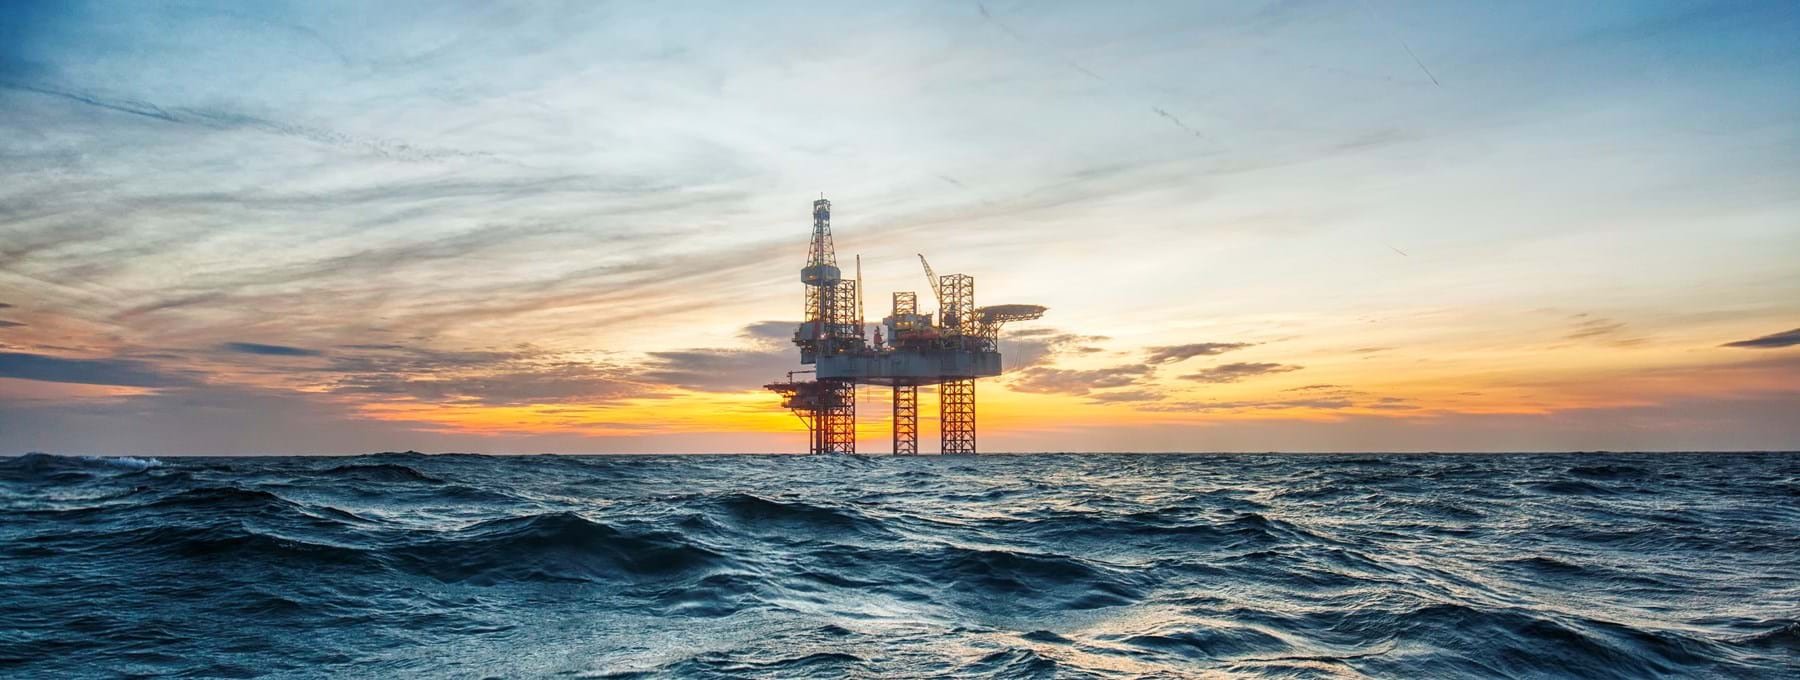 WoodMac: Deepwater oil & gas production on the rise steered by small number of players